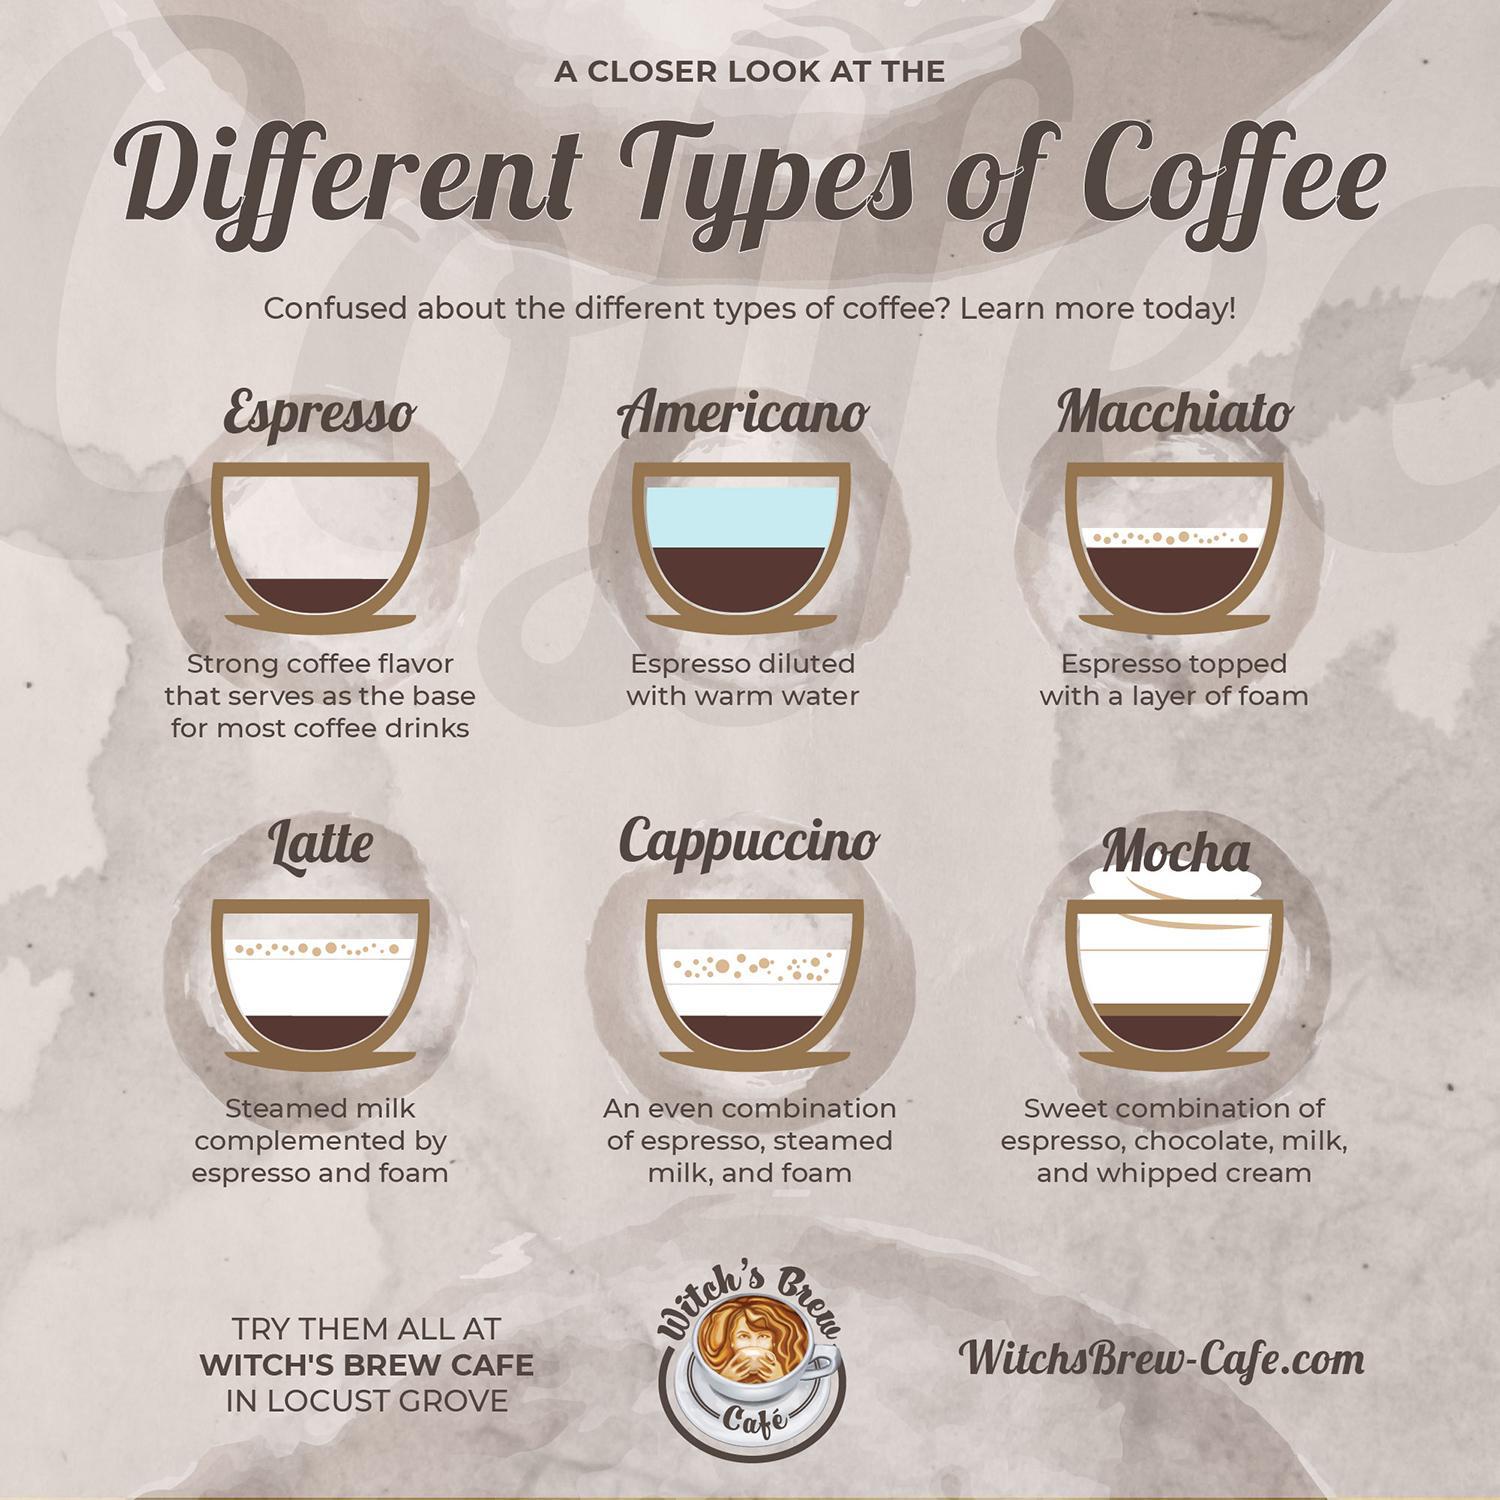 Espresso vs. Coffee: What is the Difference?